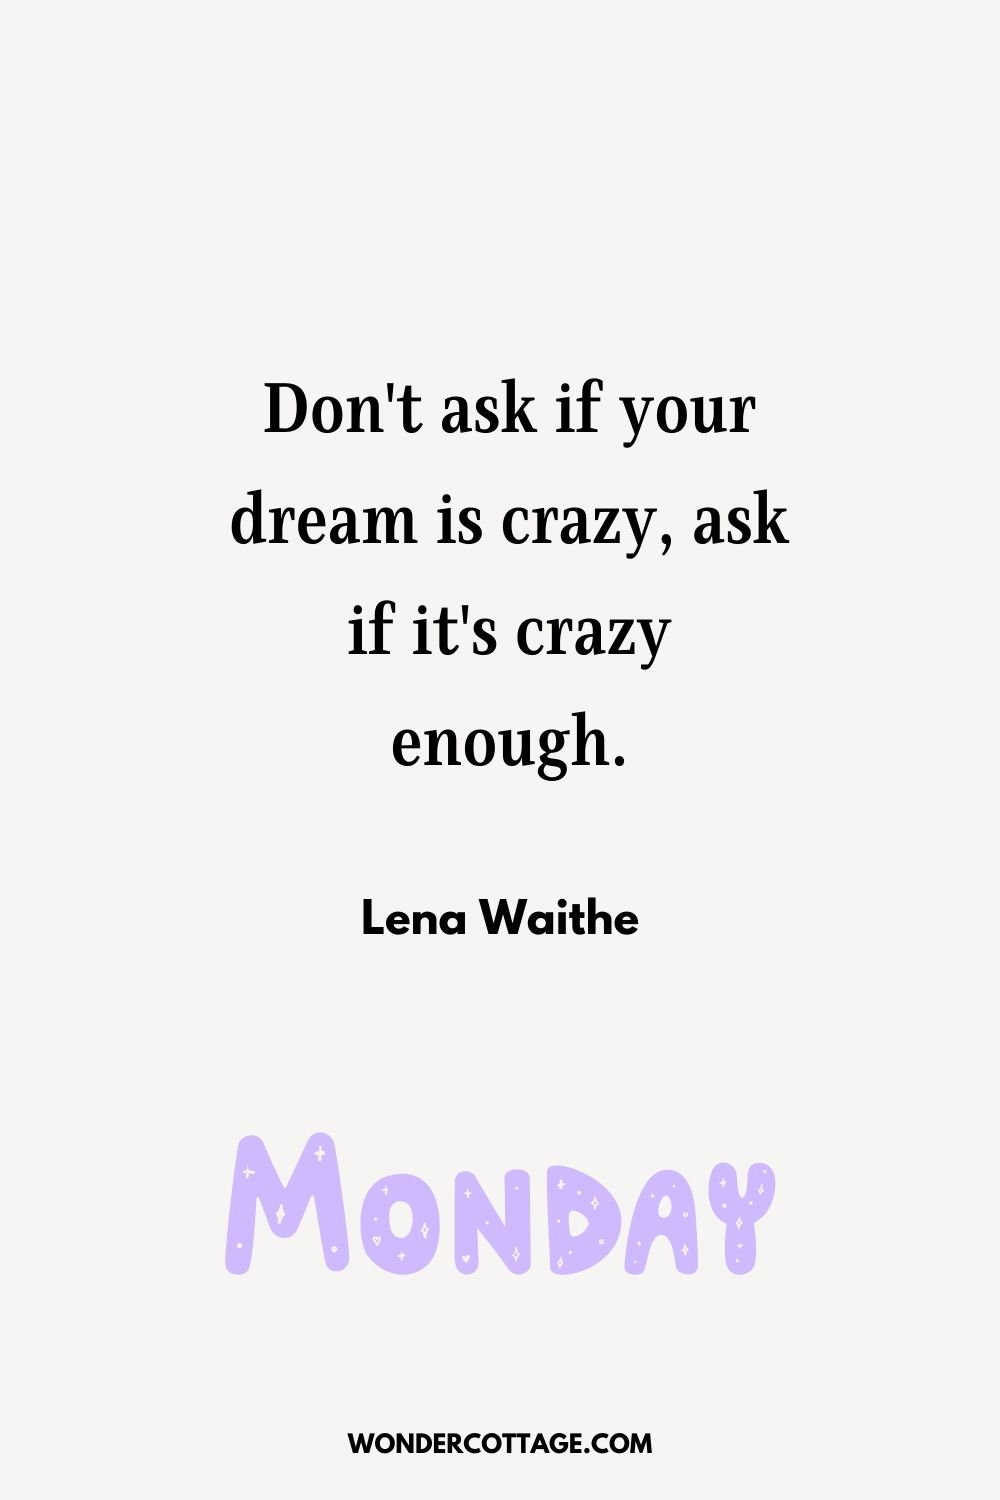 Don't ask if your dream is crazy, ask if it's crazy enough. Lena Waithe